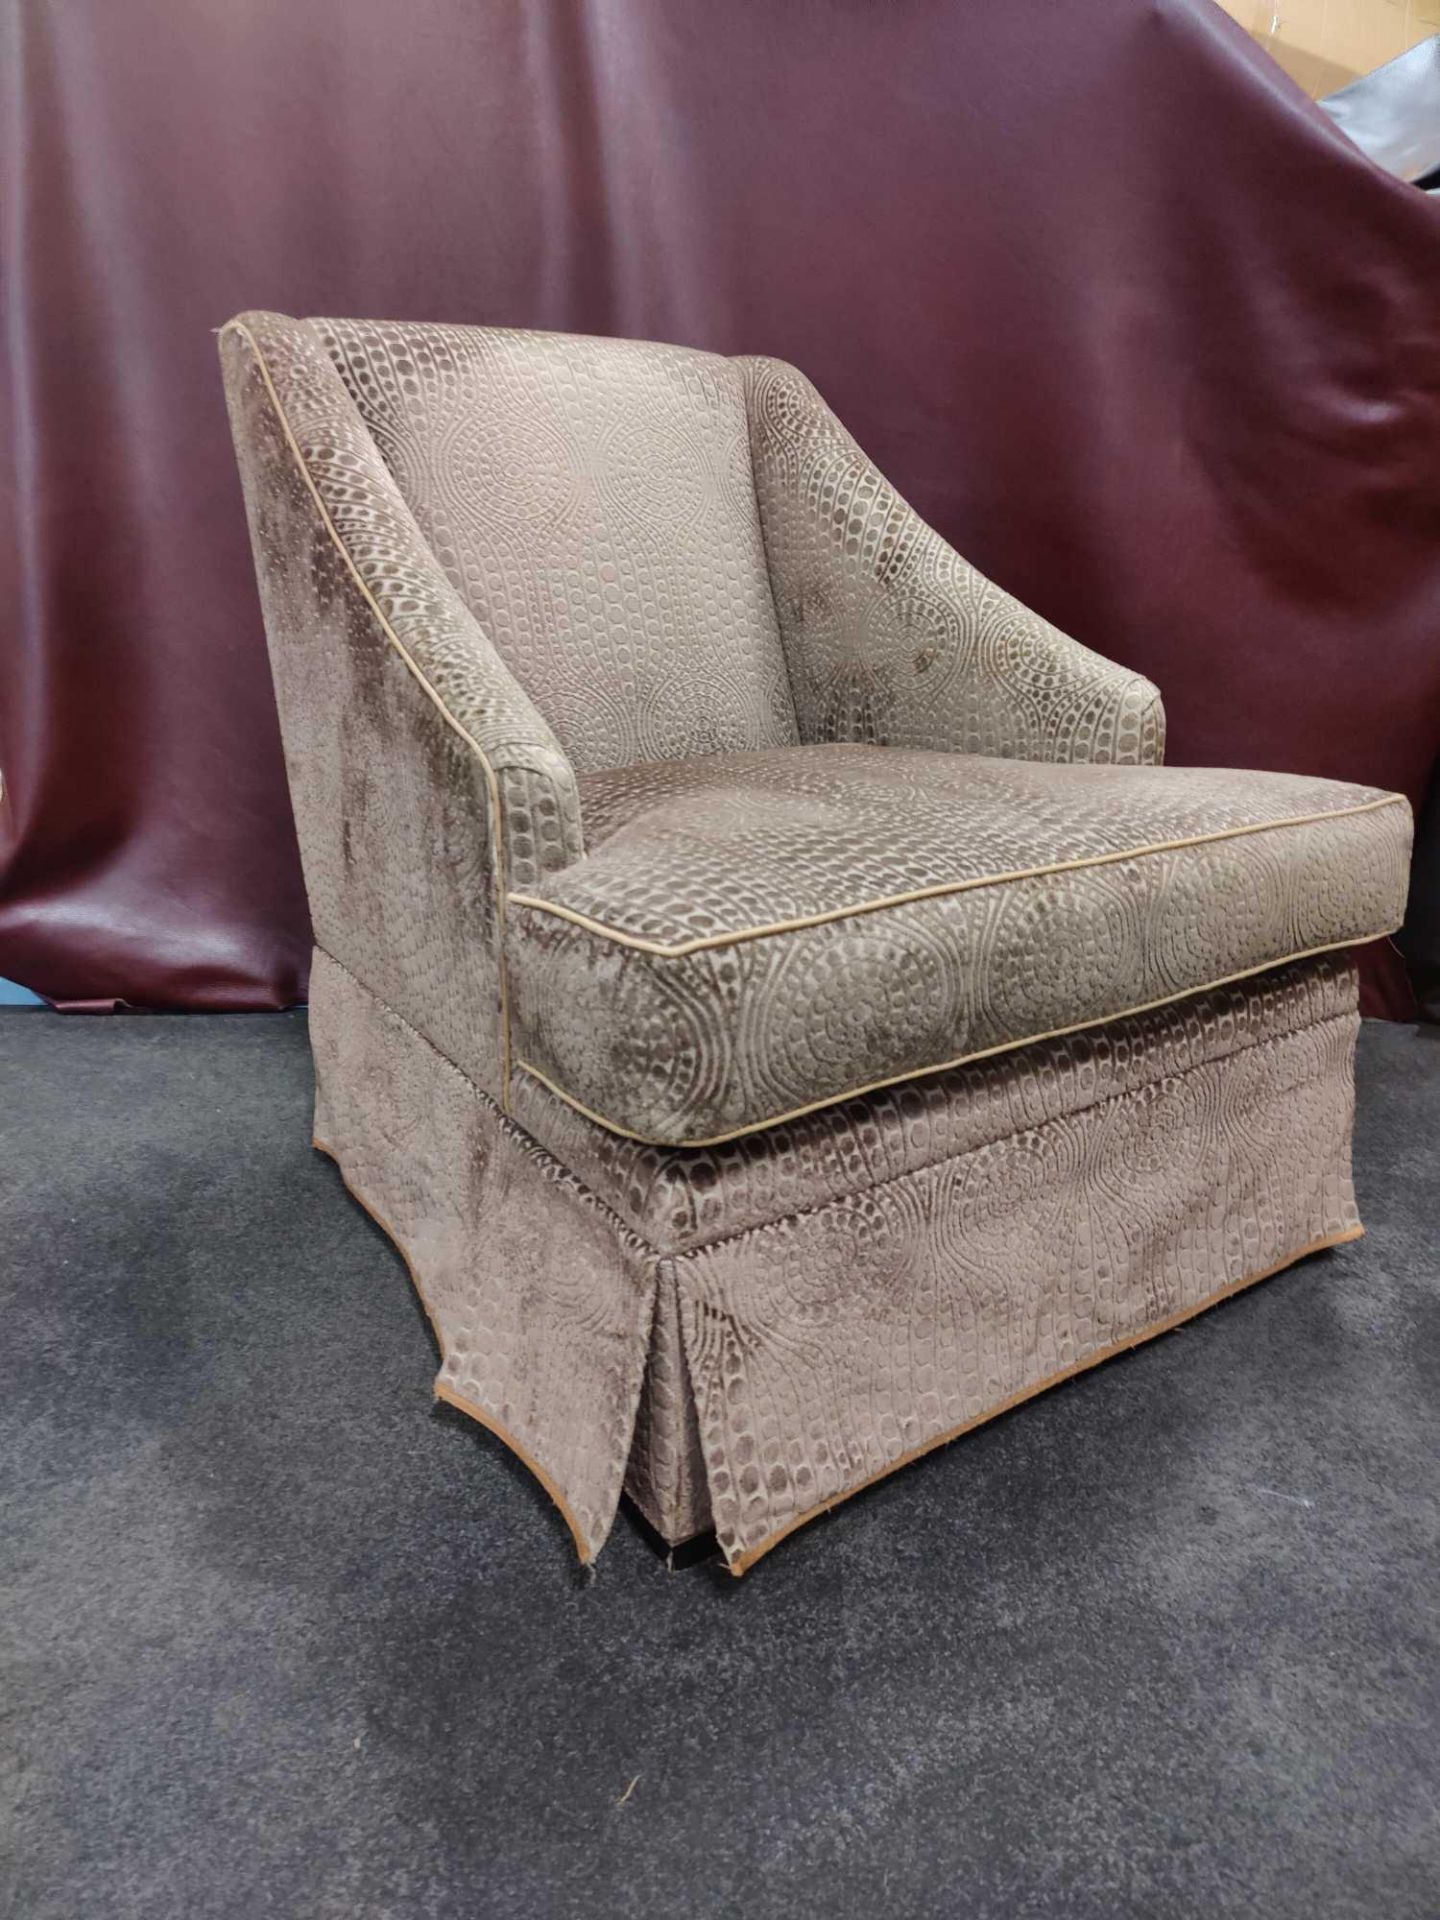 A Dudgeon British Handmade Furniture London Egerton Armchair Sloping Arms Upholstered In An Embossed - Image 3 of 3